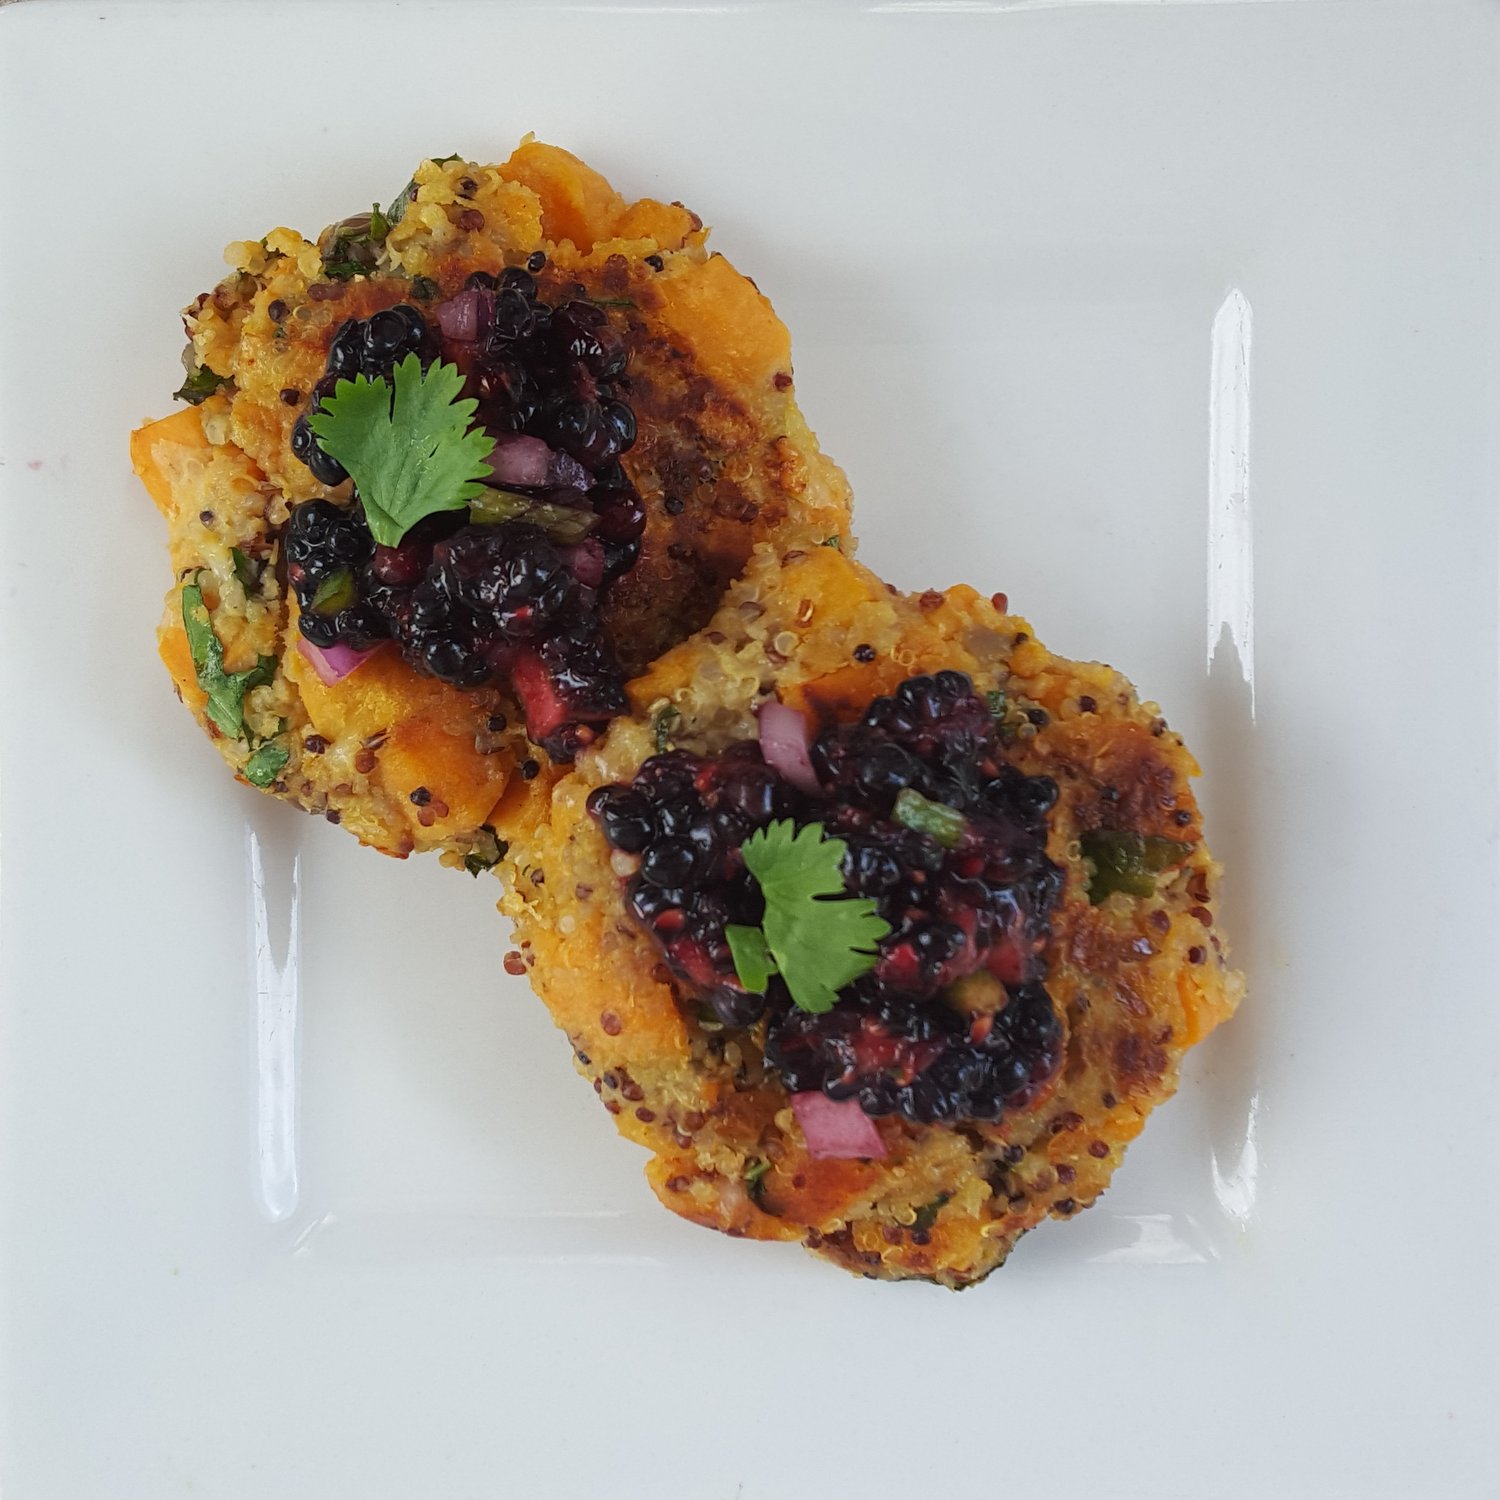 My favorite form of quinoa isn’t as a substitute for rice, it’s these quinoa patties!